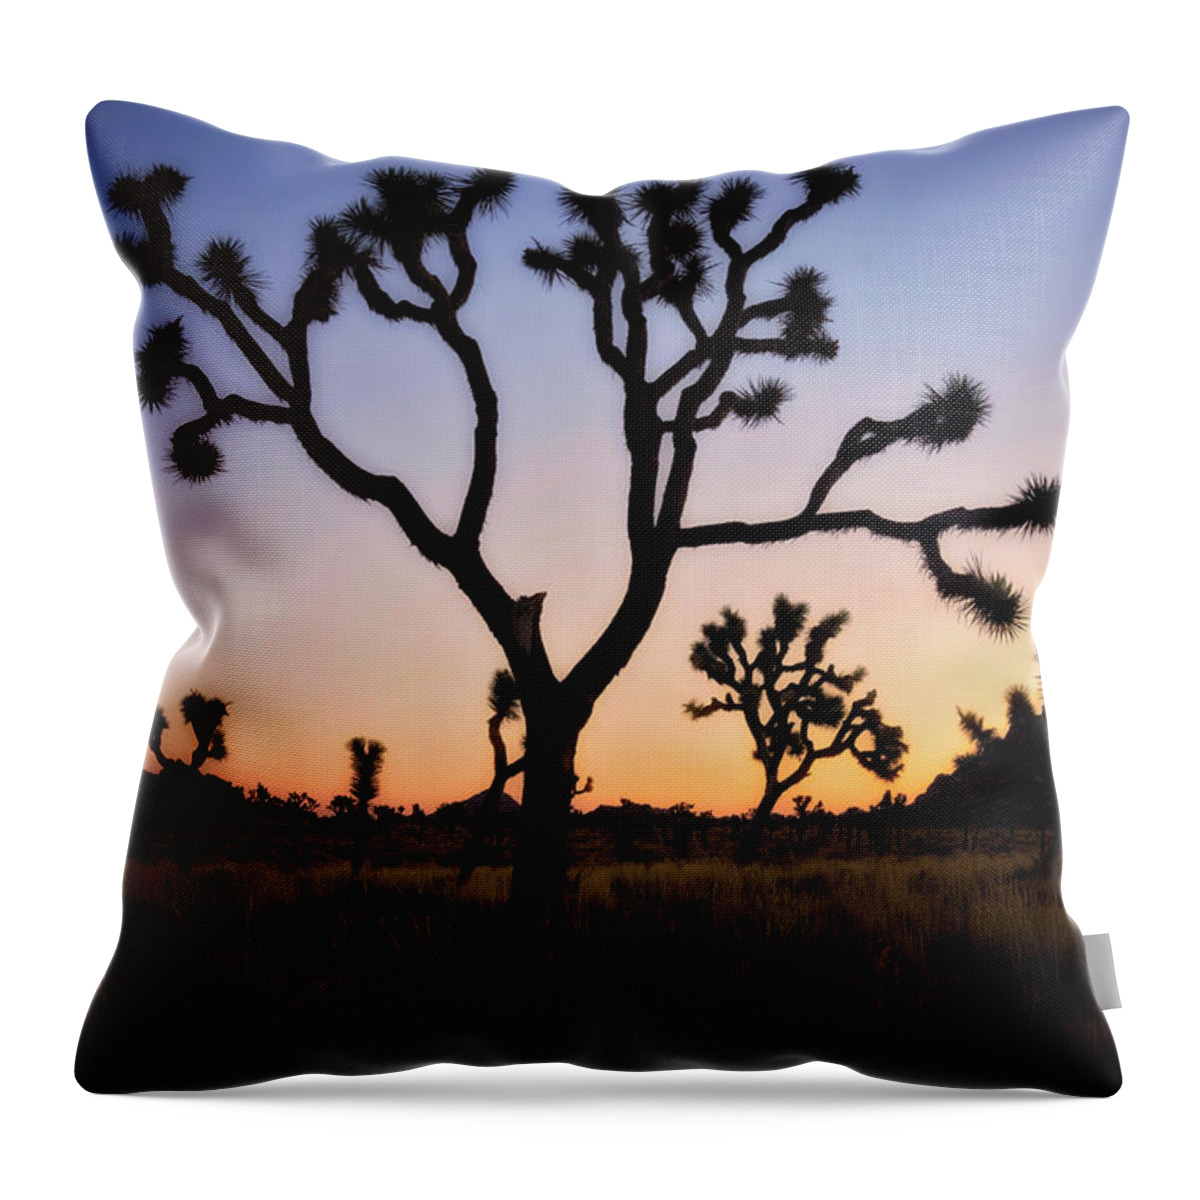 Coachella Valley Throw Pillow featuring the photograph Night Silhouette by Nicki Frates